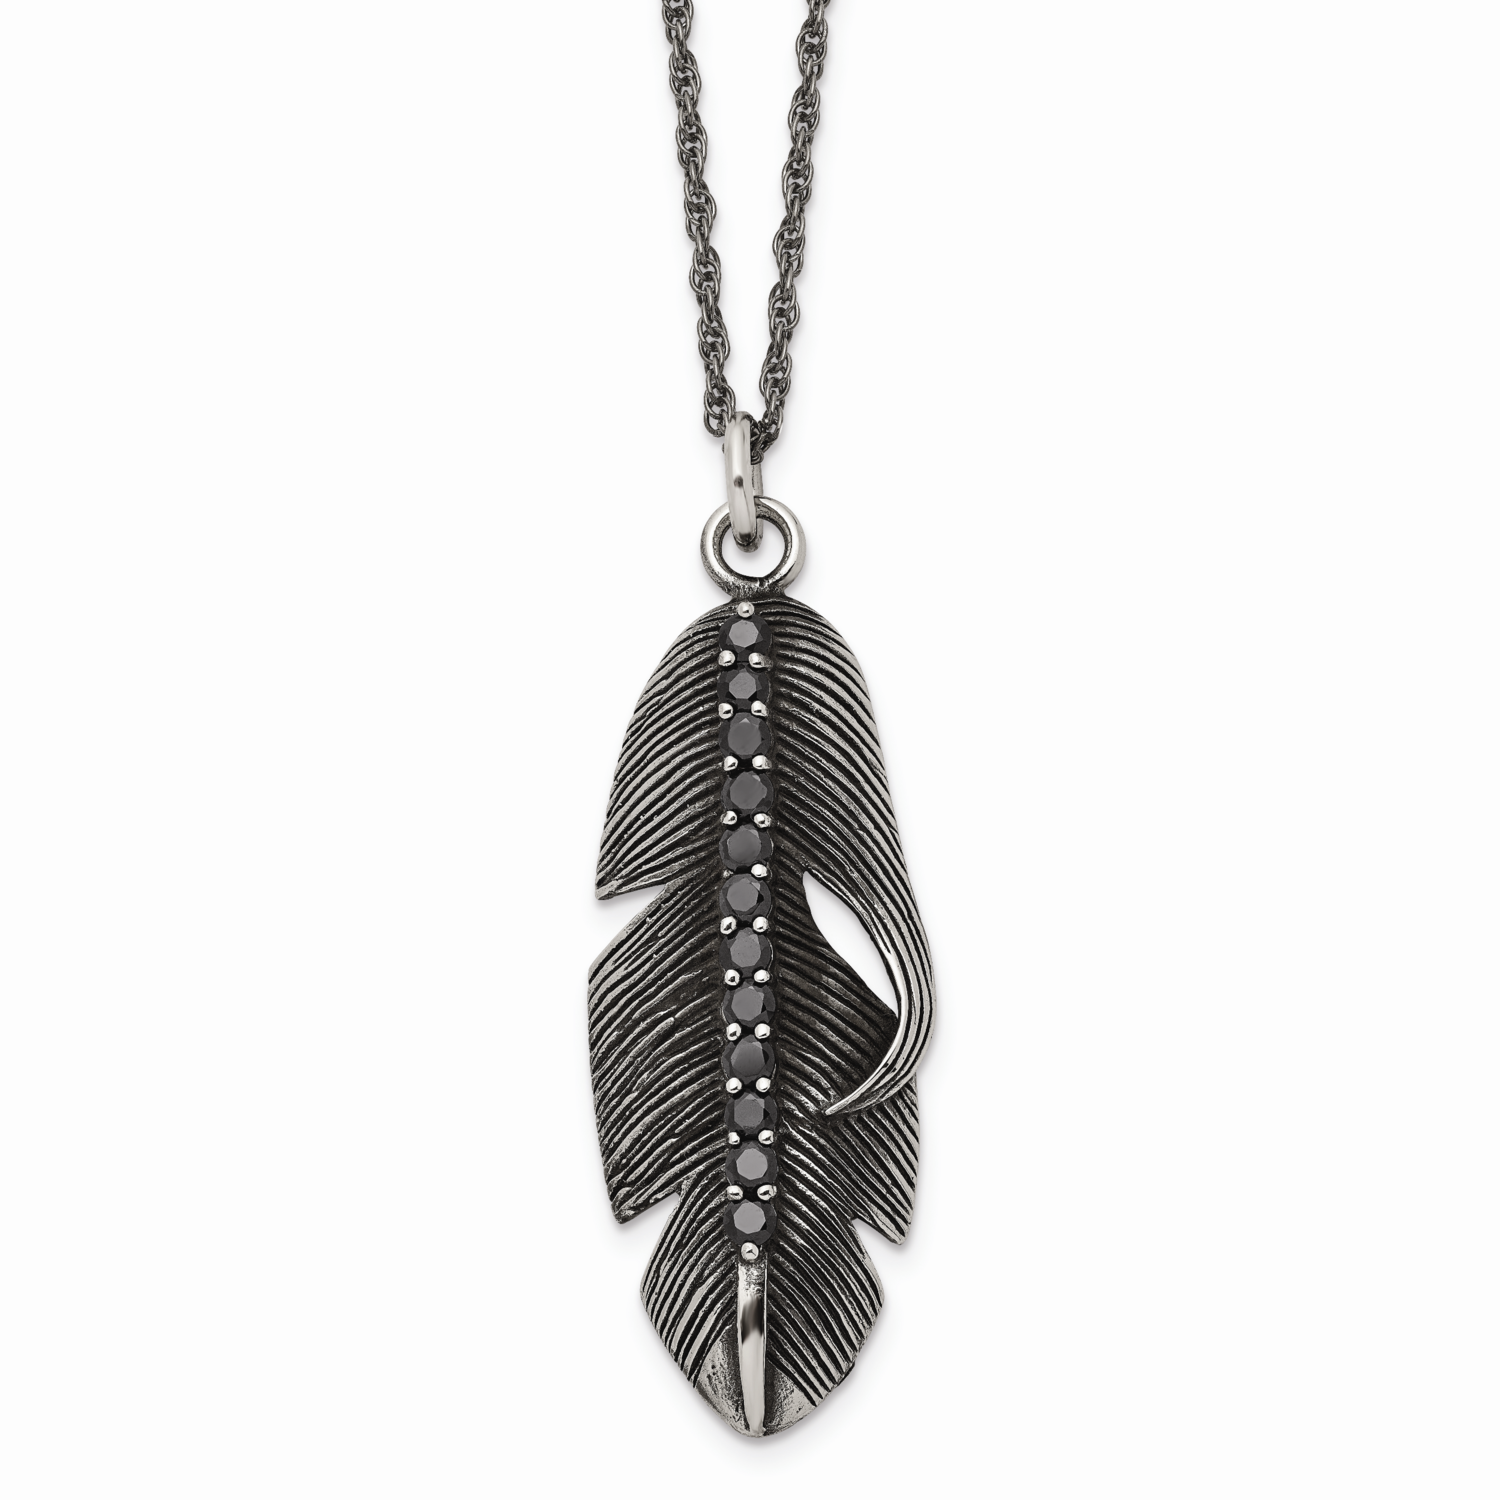 Antiqued Feather Black CZ Stone Stone Necklace Stainless Steel Polished SRN1704-20